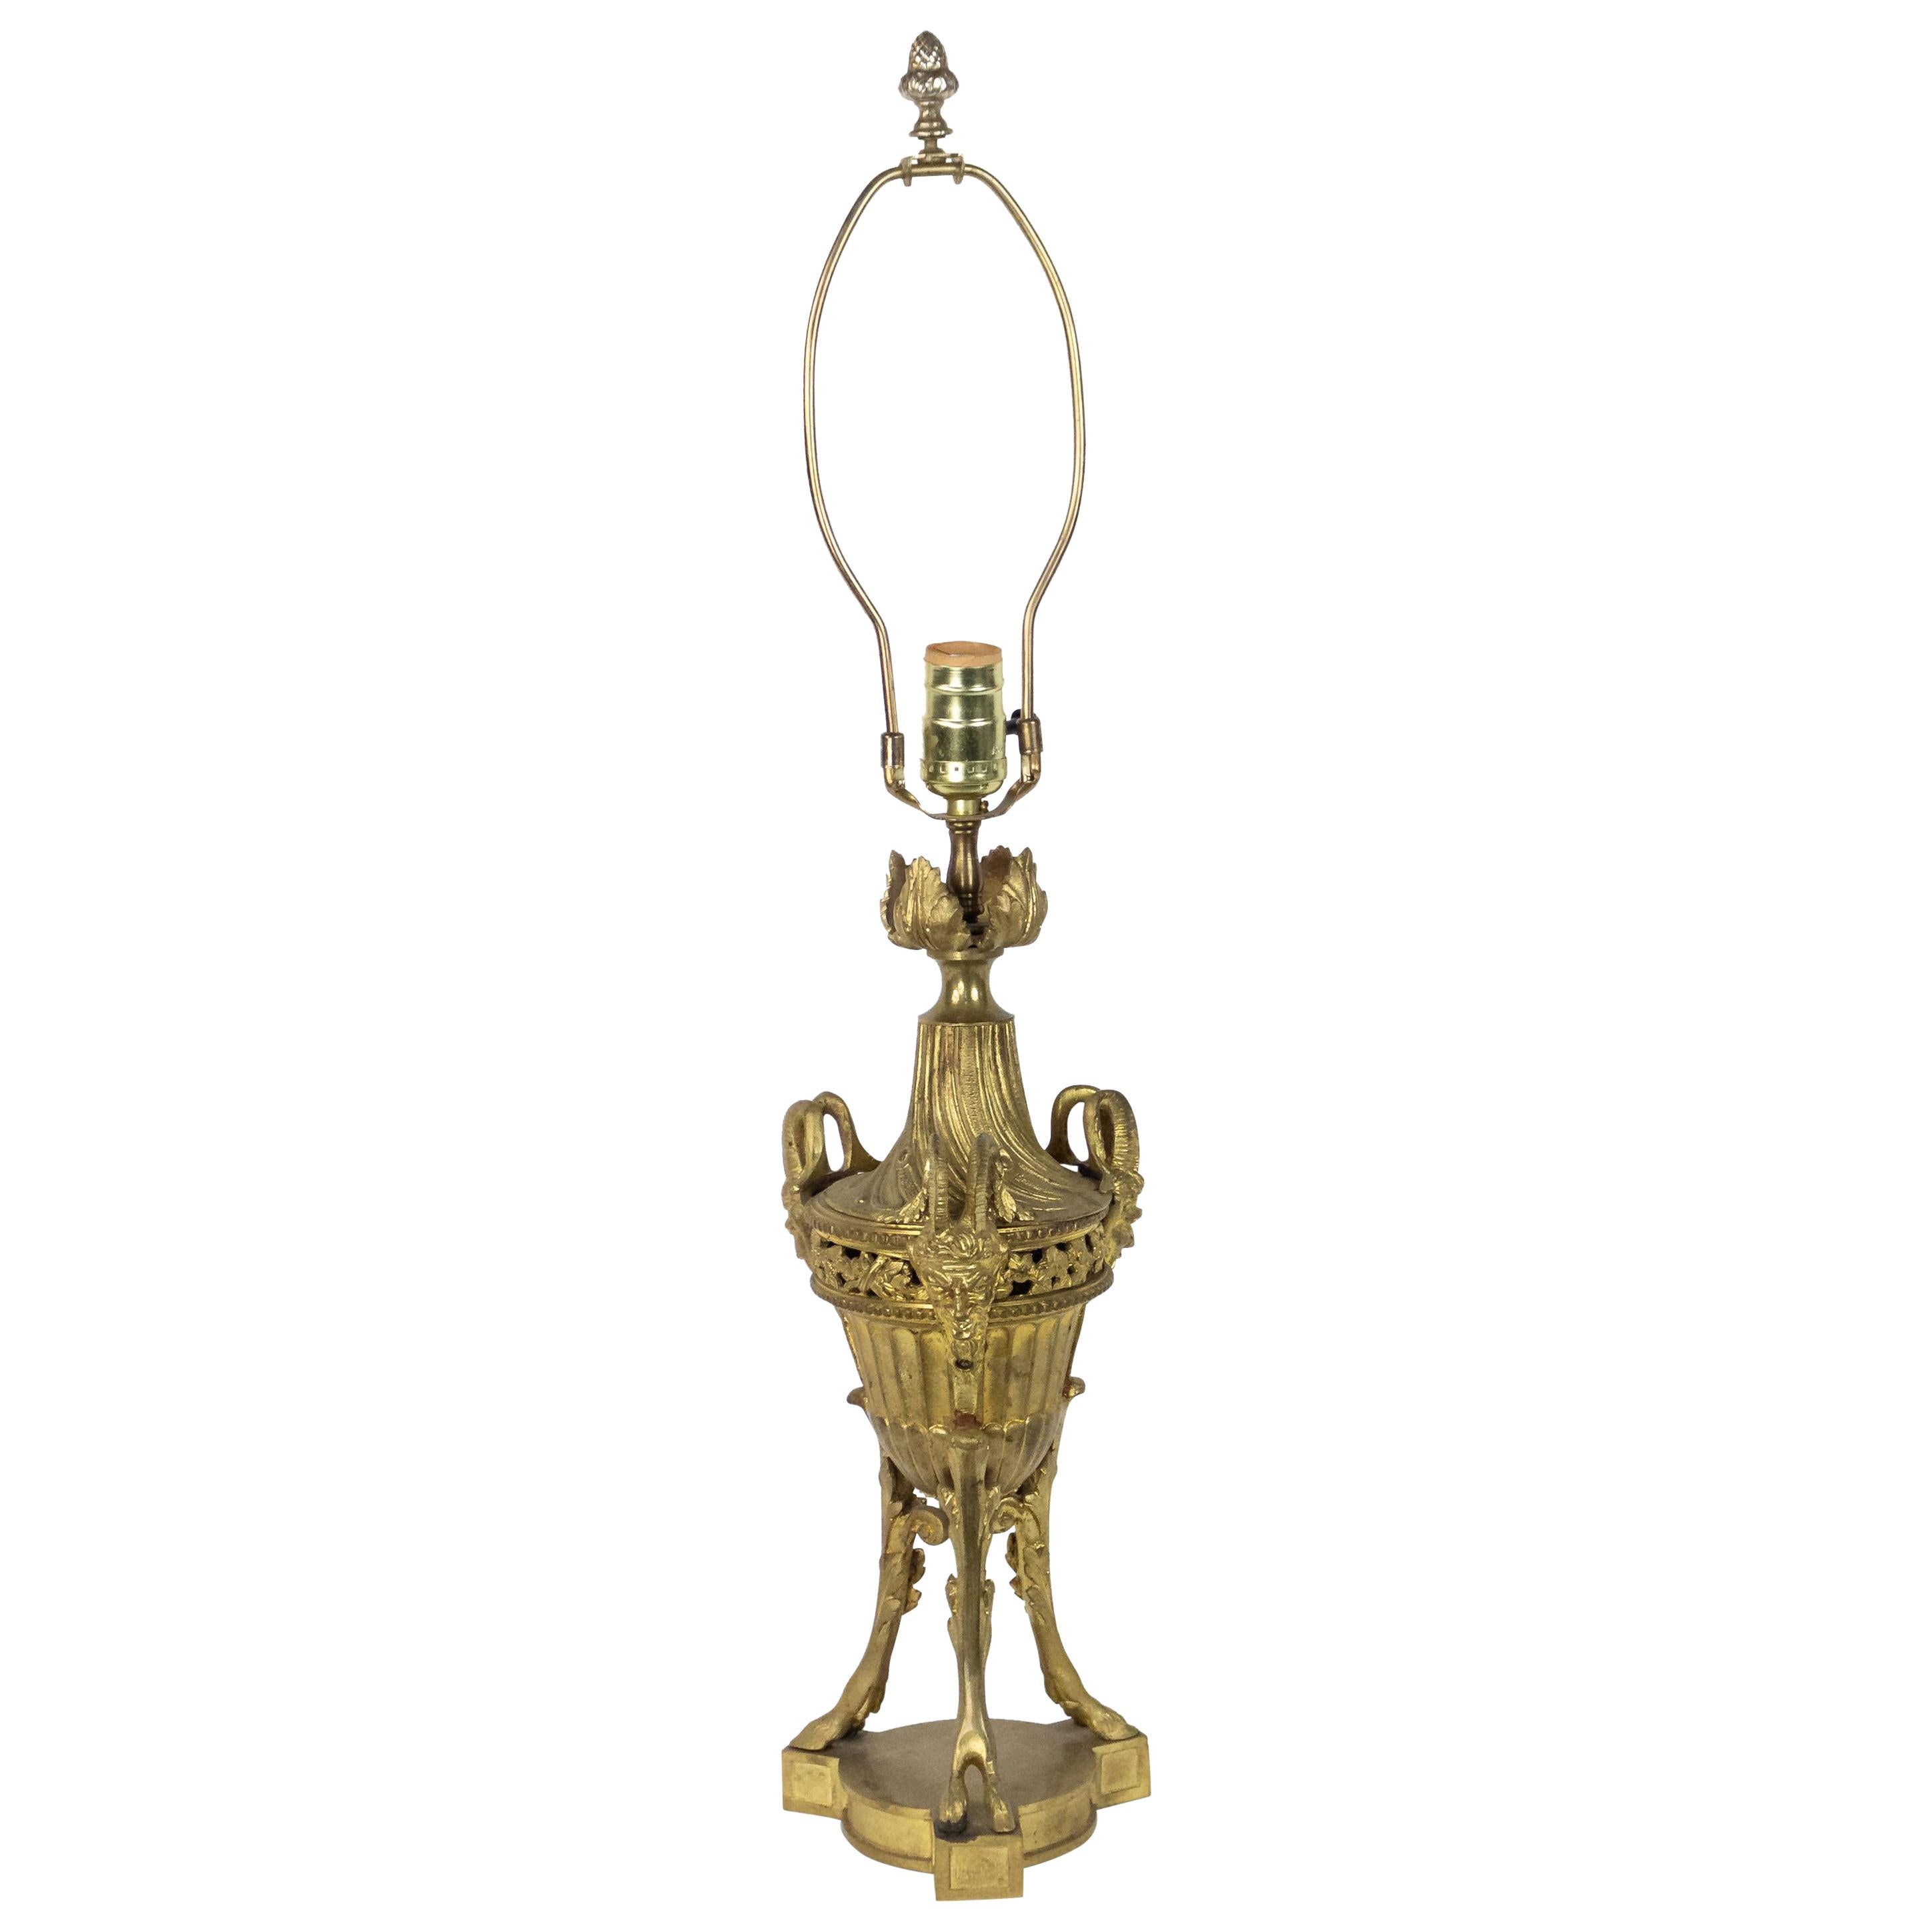 French Victorian Gilt Bronze Satyr Table Lamps